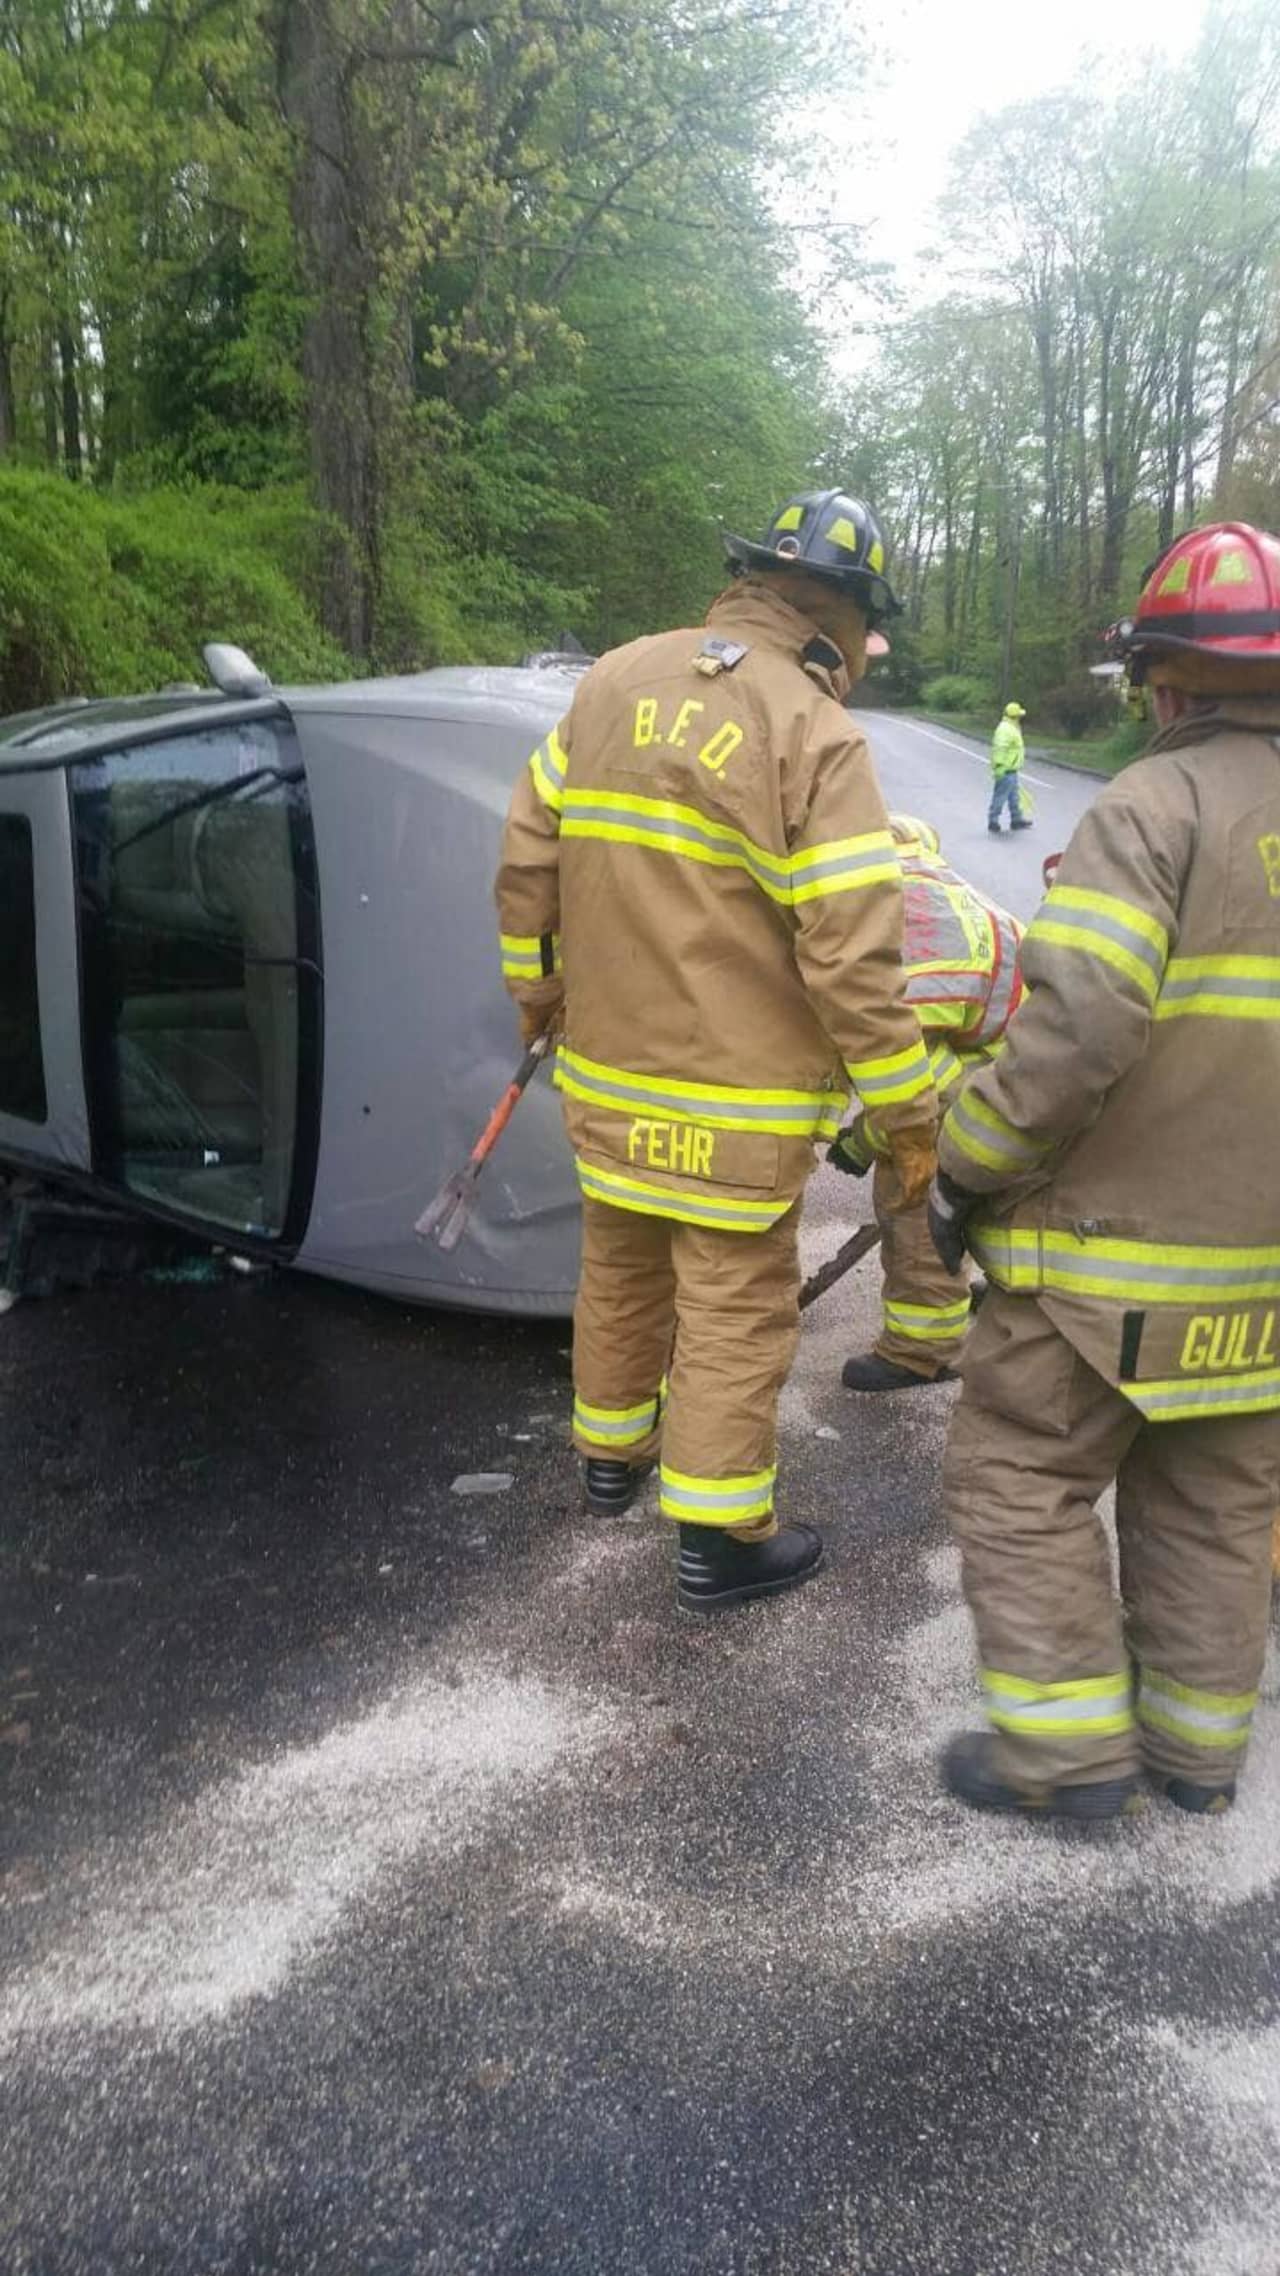 Crews from Bethel respond to an overturned vehicle.